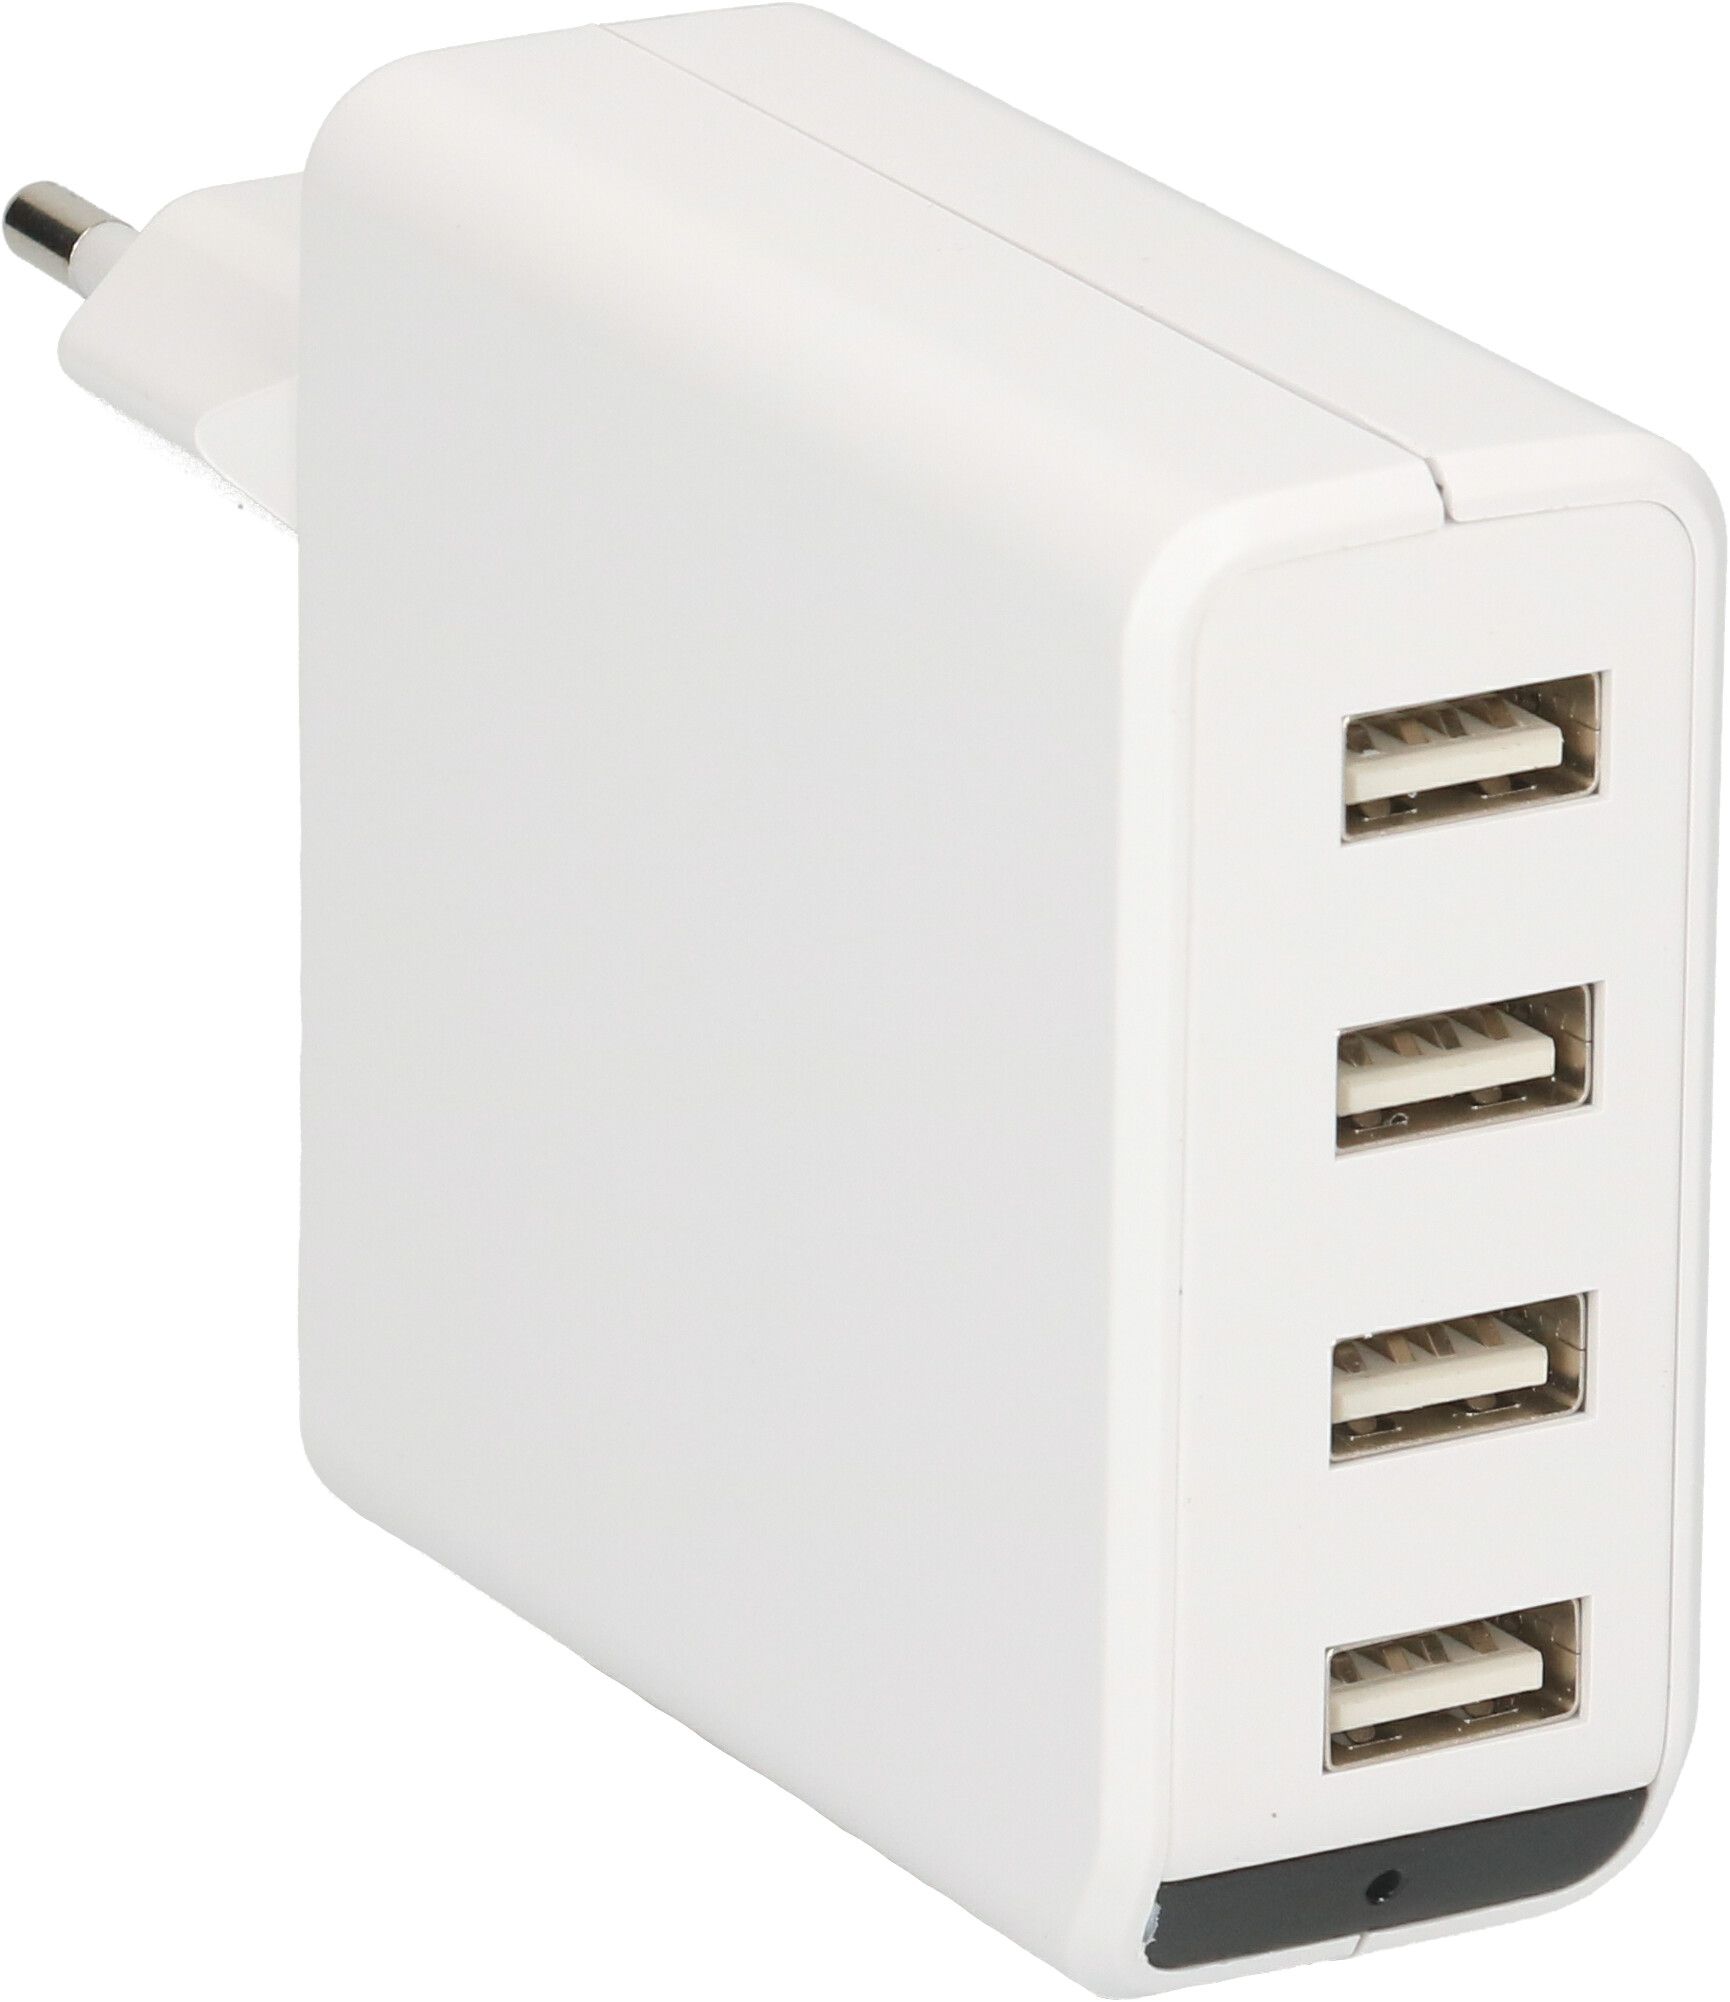 4.8A AC/ DC USB Charger with 4 USB Outlets